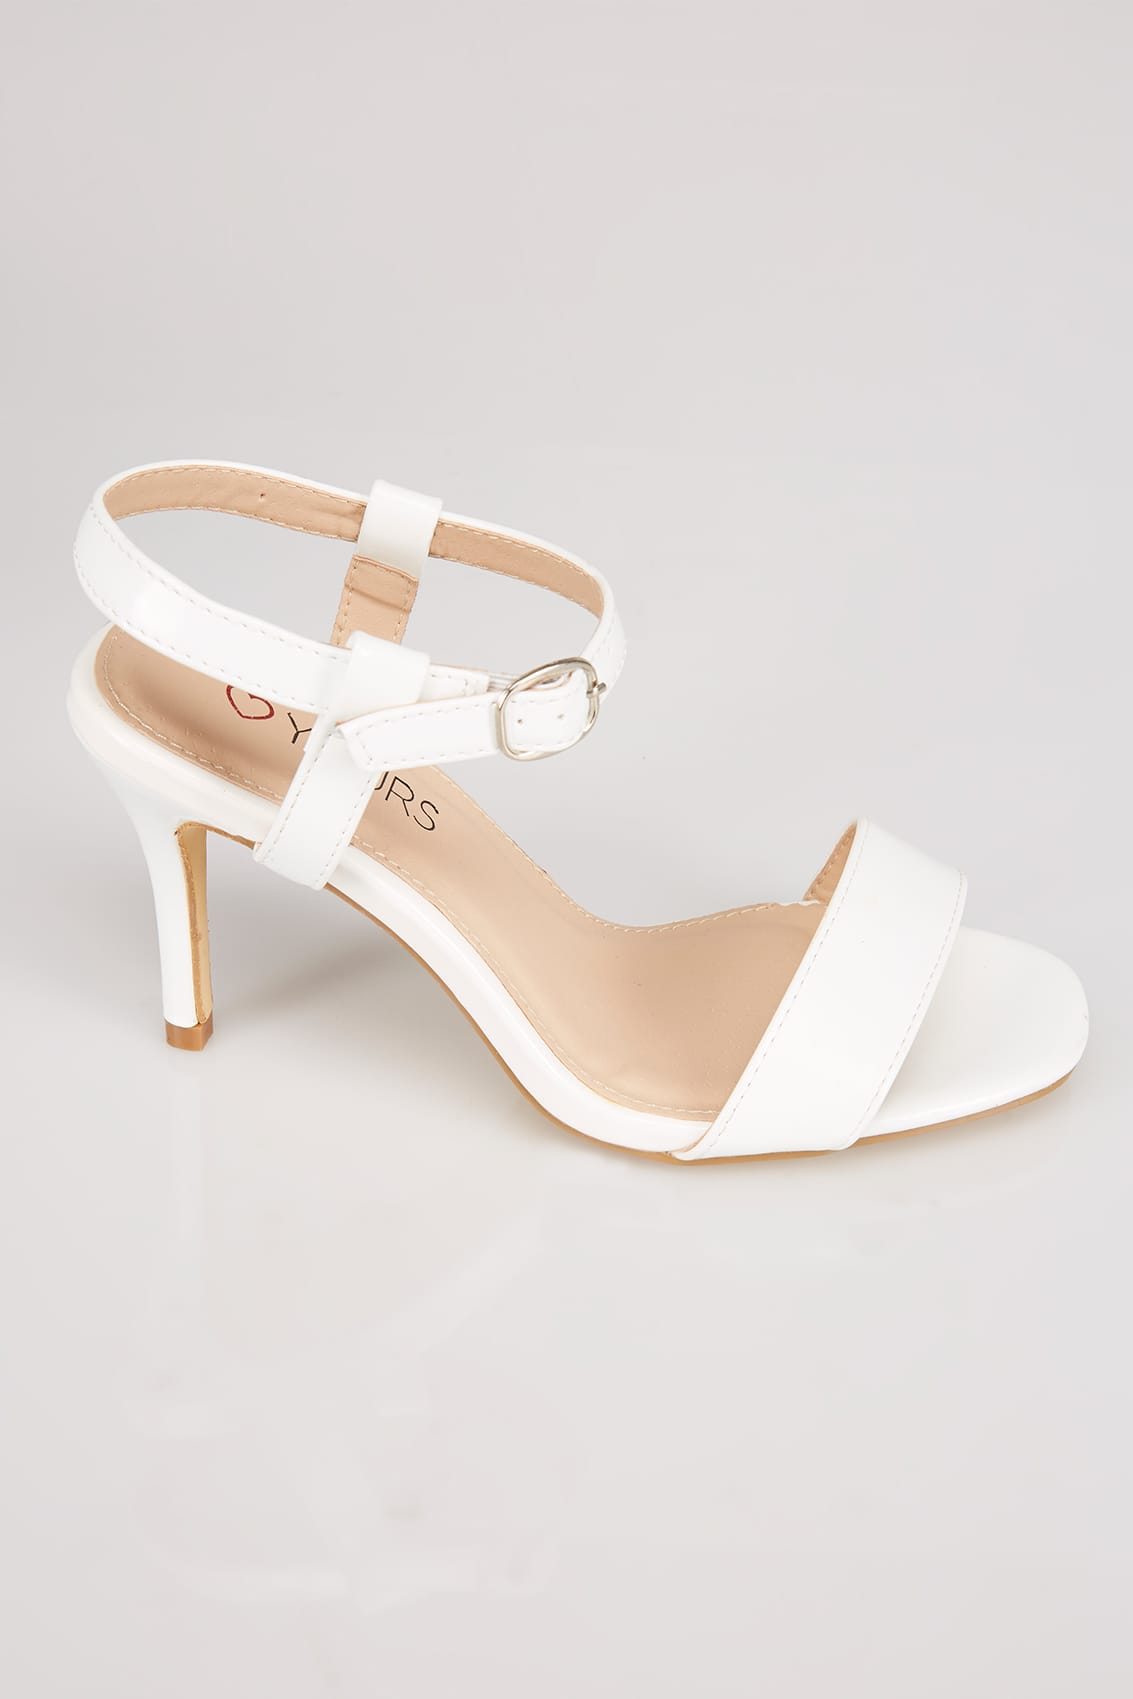 White Patent Square Toe Heeled Sandals With Ankle Strap In EEE Fit 4EEE ...